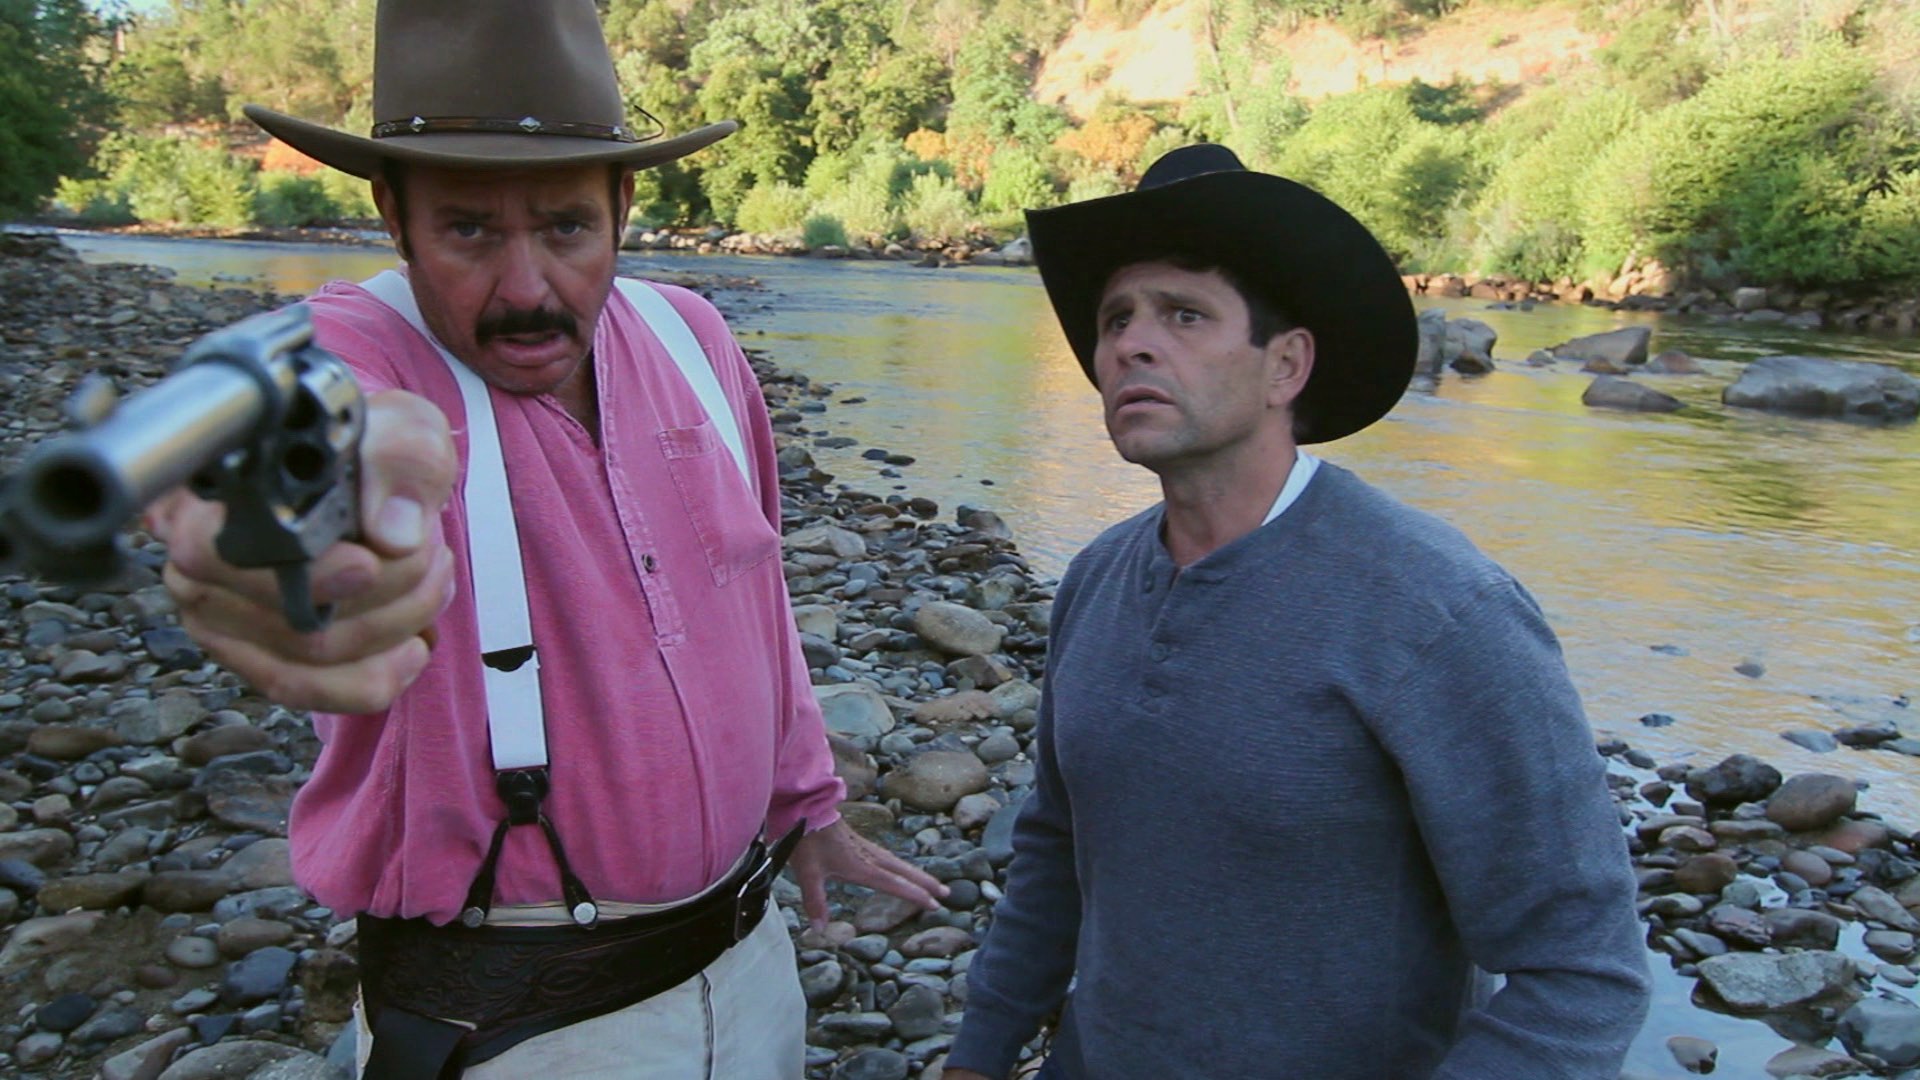 Rob Tillitz as Henry pointing a six shooter and Bill Bettencourt as Arlen with a concerned look in THE GOLdEN TREE (2010).